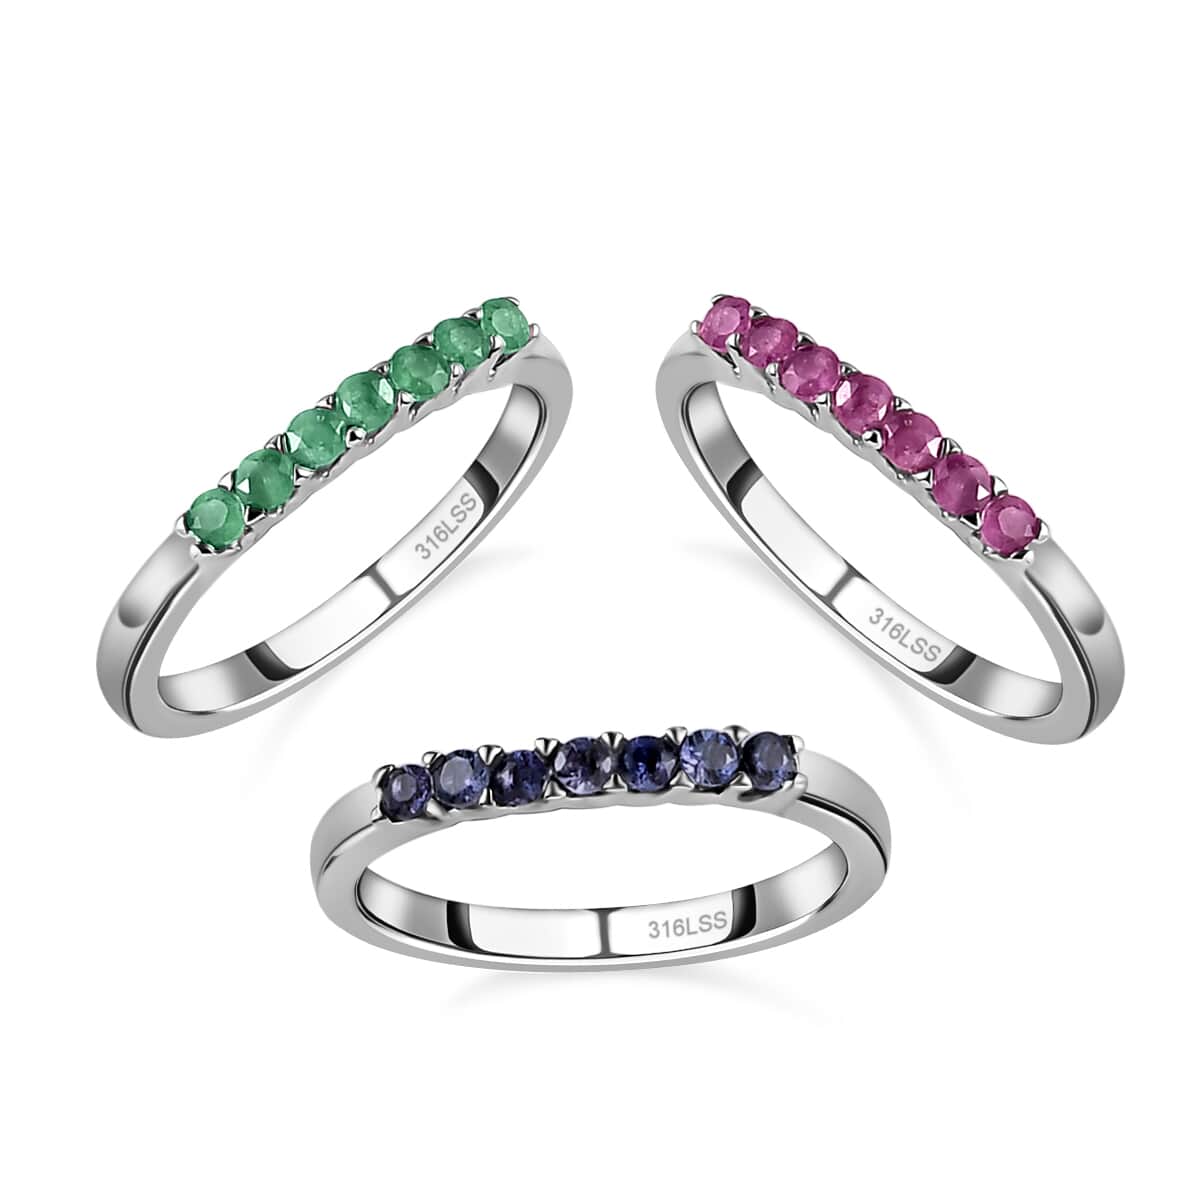 set-of-3-niassa-ruby-tanzanite-and-kagem-zambian-emerald-stackable-ring-in-stainless-steel-size-5.0-1.00-ctw image number 0